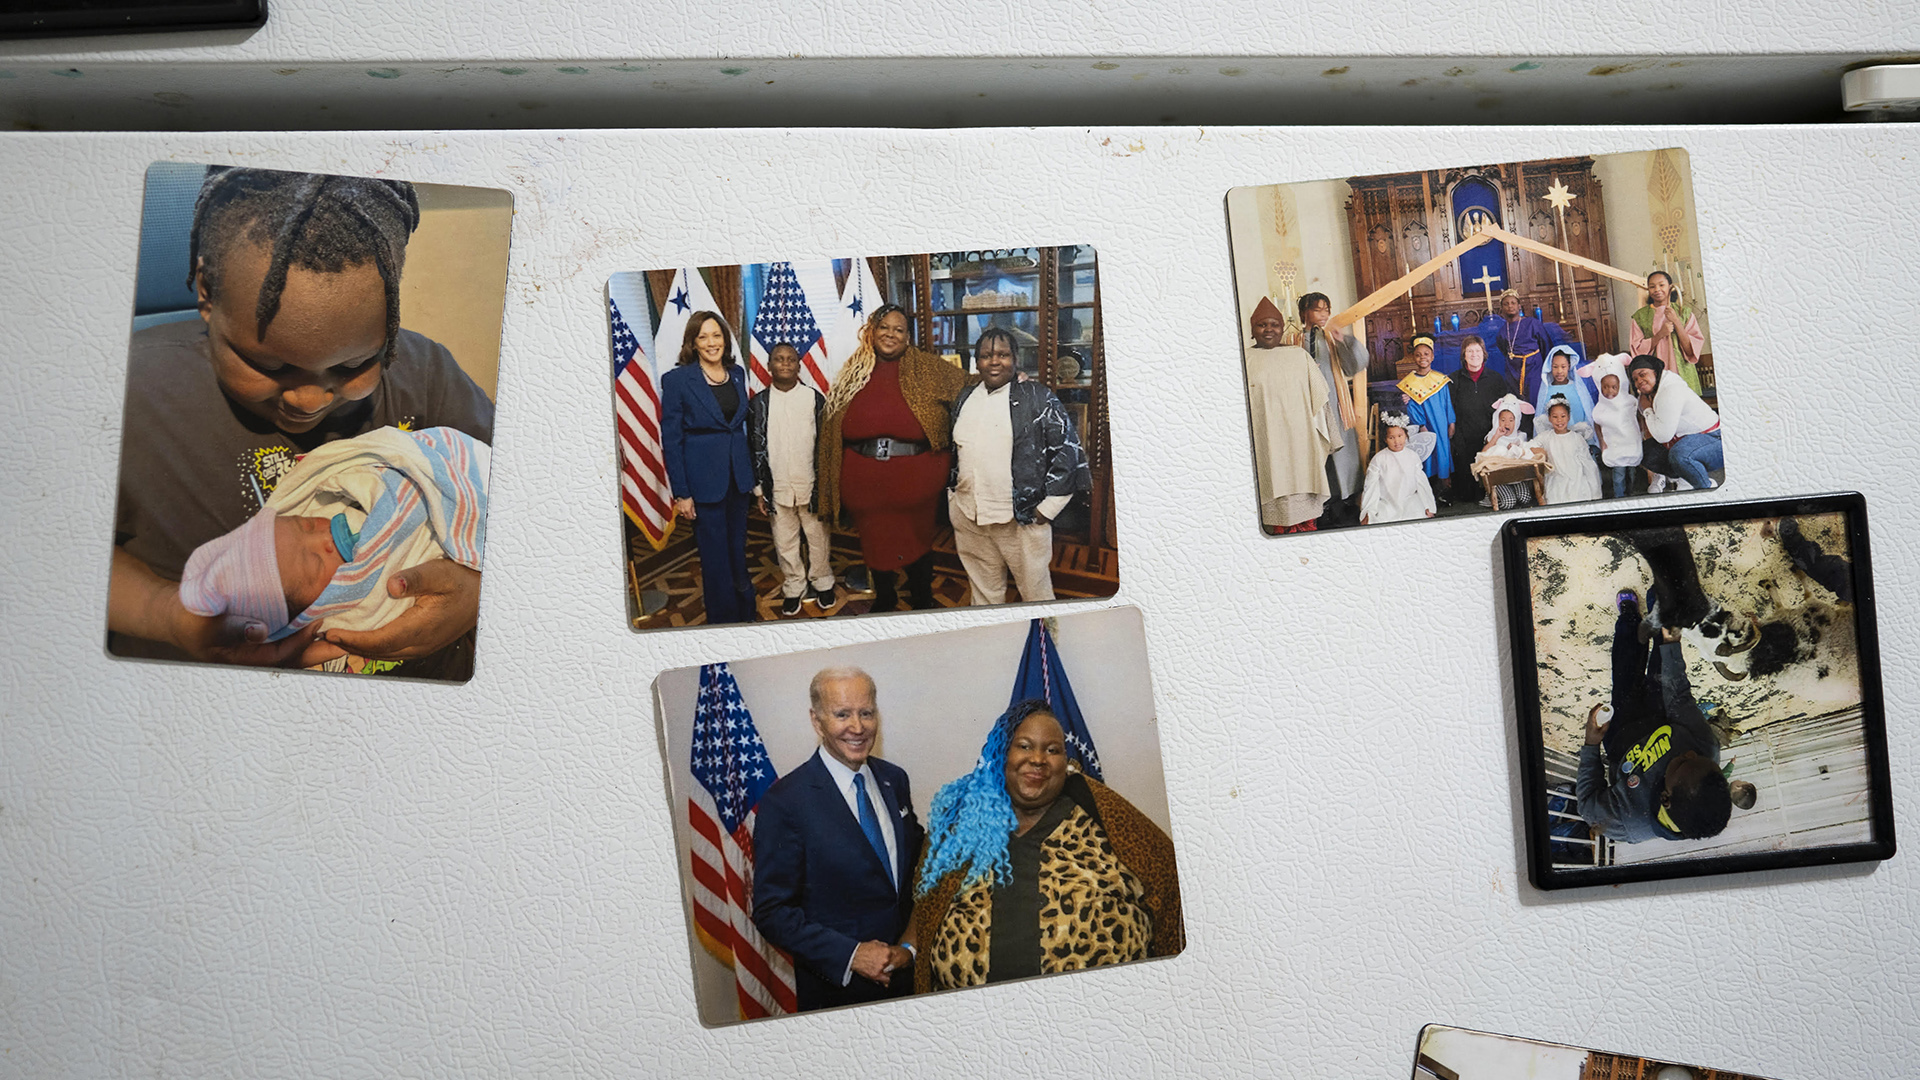 Multiple photos are attached to the surface of a refrigerator door, including one with Deanna Branch posing with Joe Biden and another with Branch and her family posing with Kamala Harris.